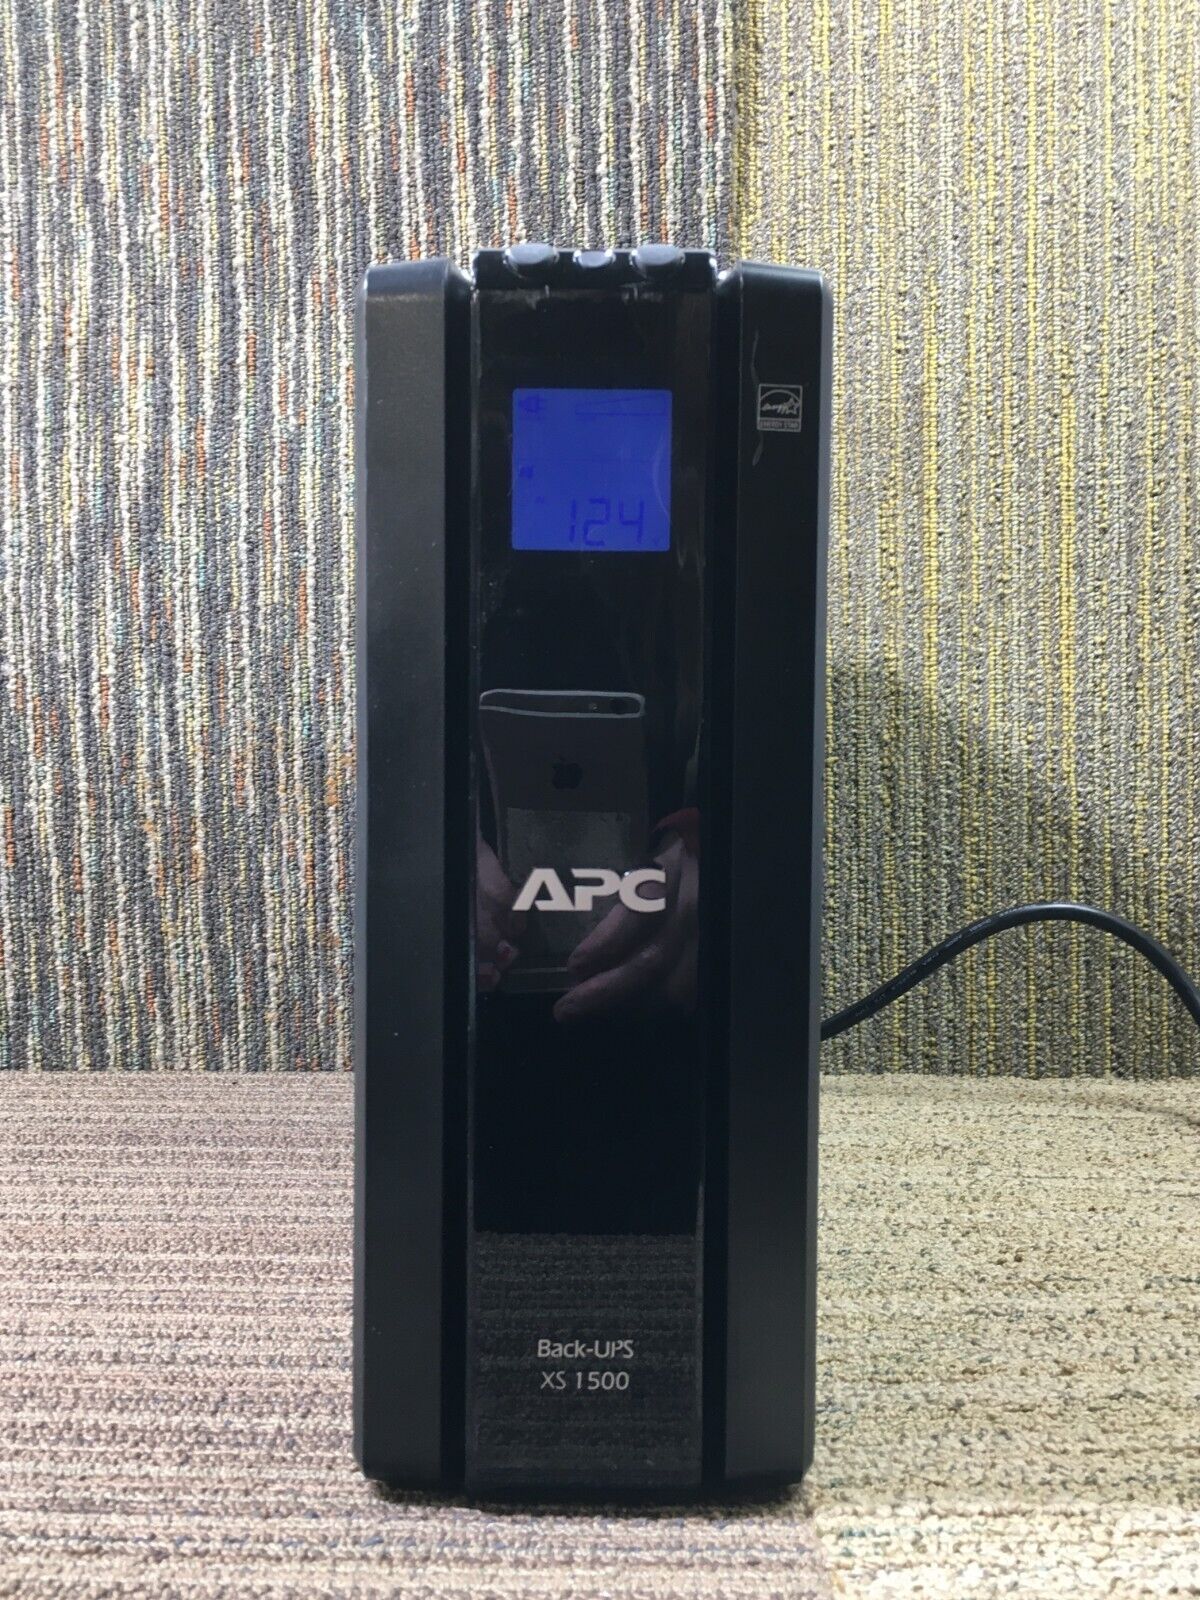 APC Back-UPS XS 1500 BX1500G 10 Outlets UPS WORKS with Battery